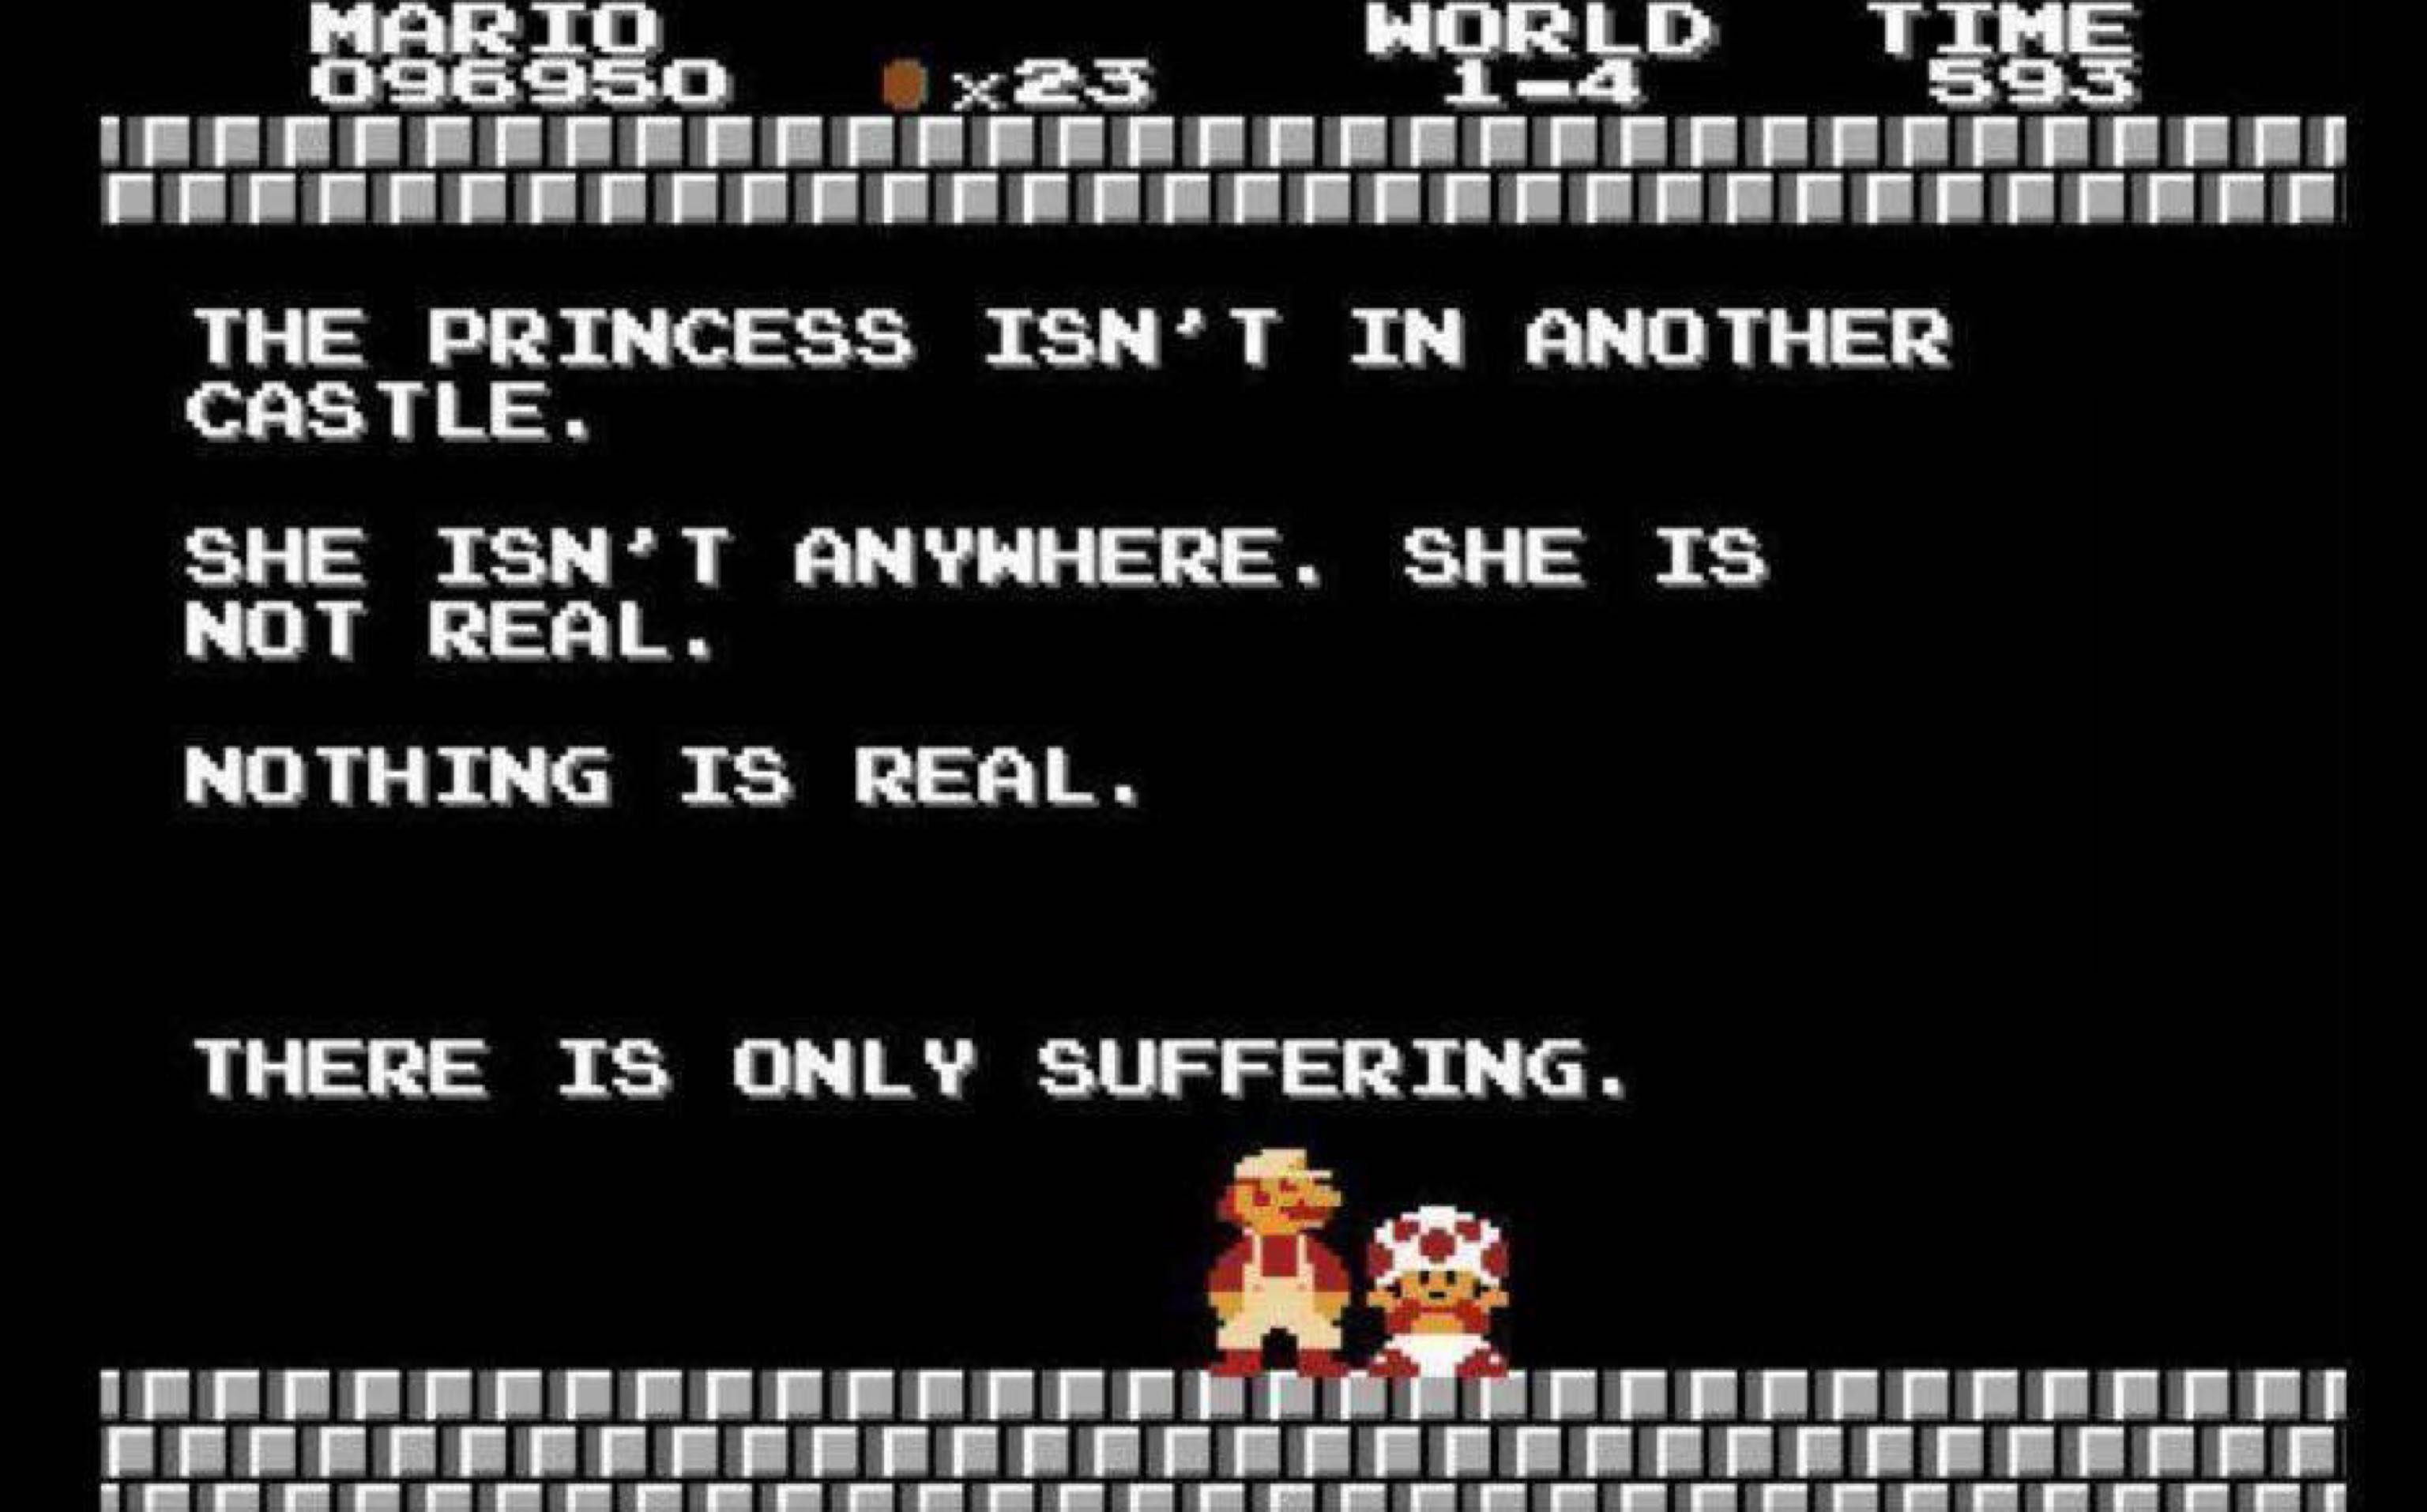 princess is in another castle - Mario 096950 World Time The Princess Isn'T In Another Castle, She Isn'T Anywhere, She Is Not Real Nothing Is Real. There Is Only Suffering,